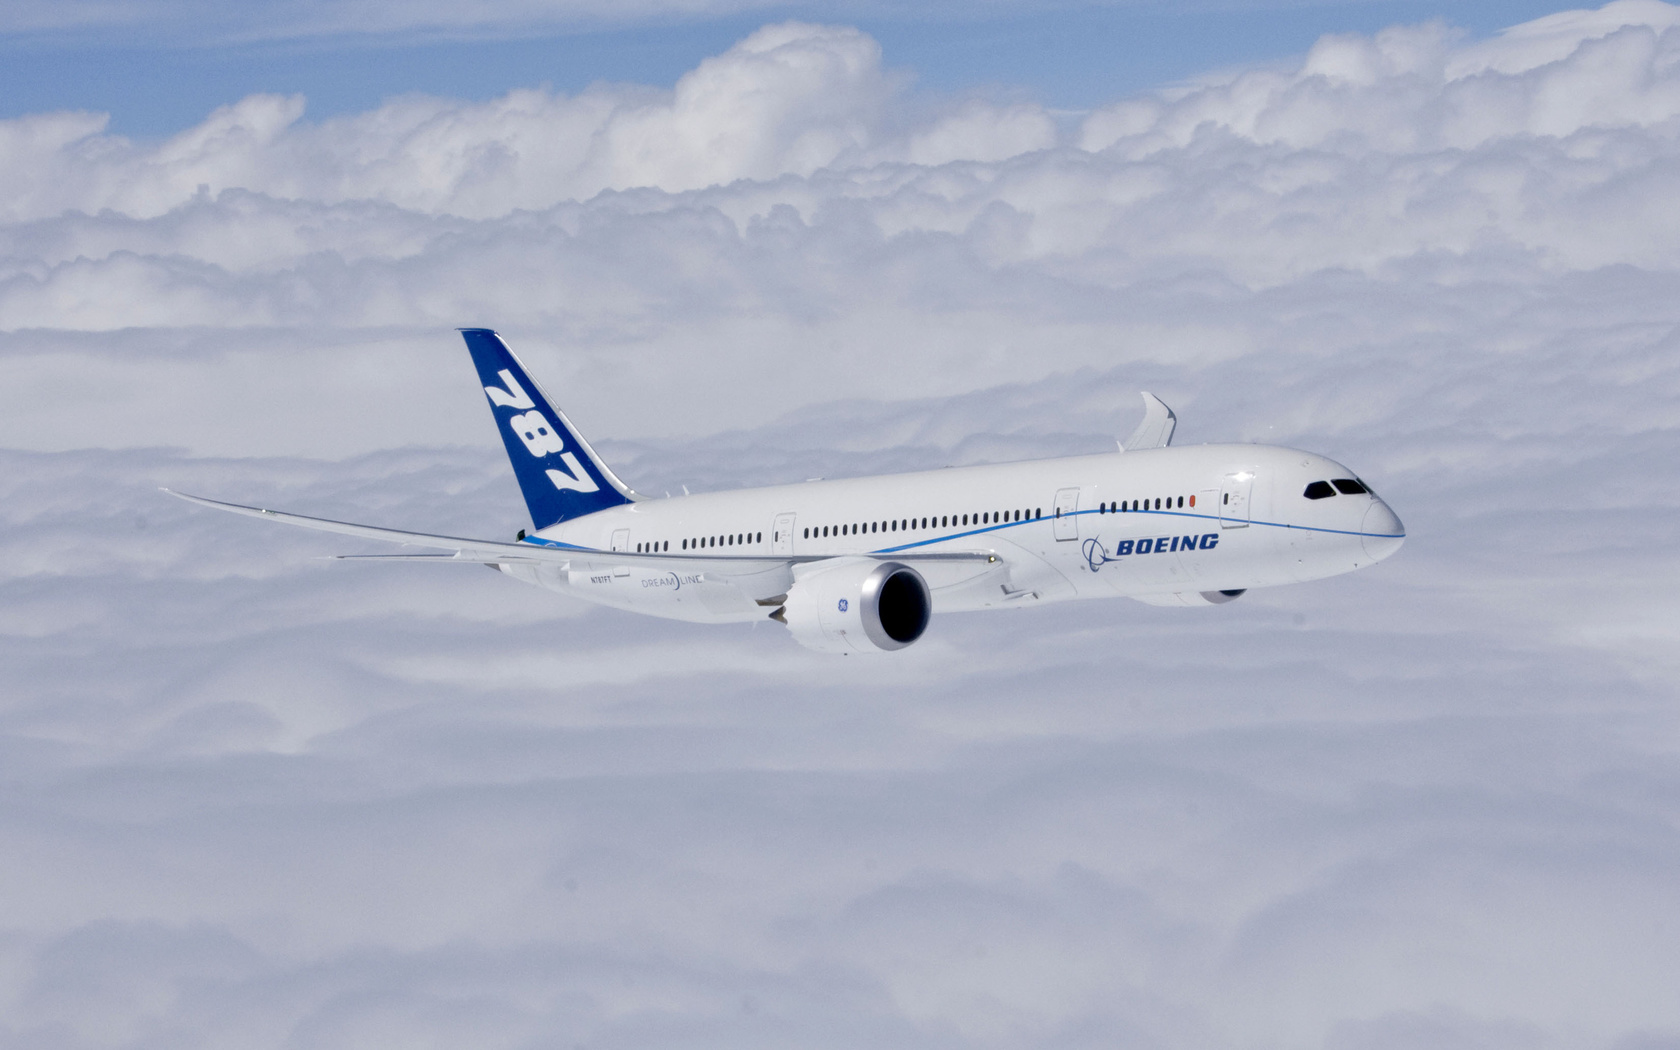 powered by ge engines, Boeing 787-8, boeing completes first flight of first 787 dreamliner, 